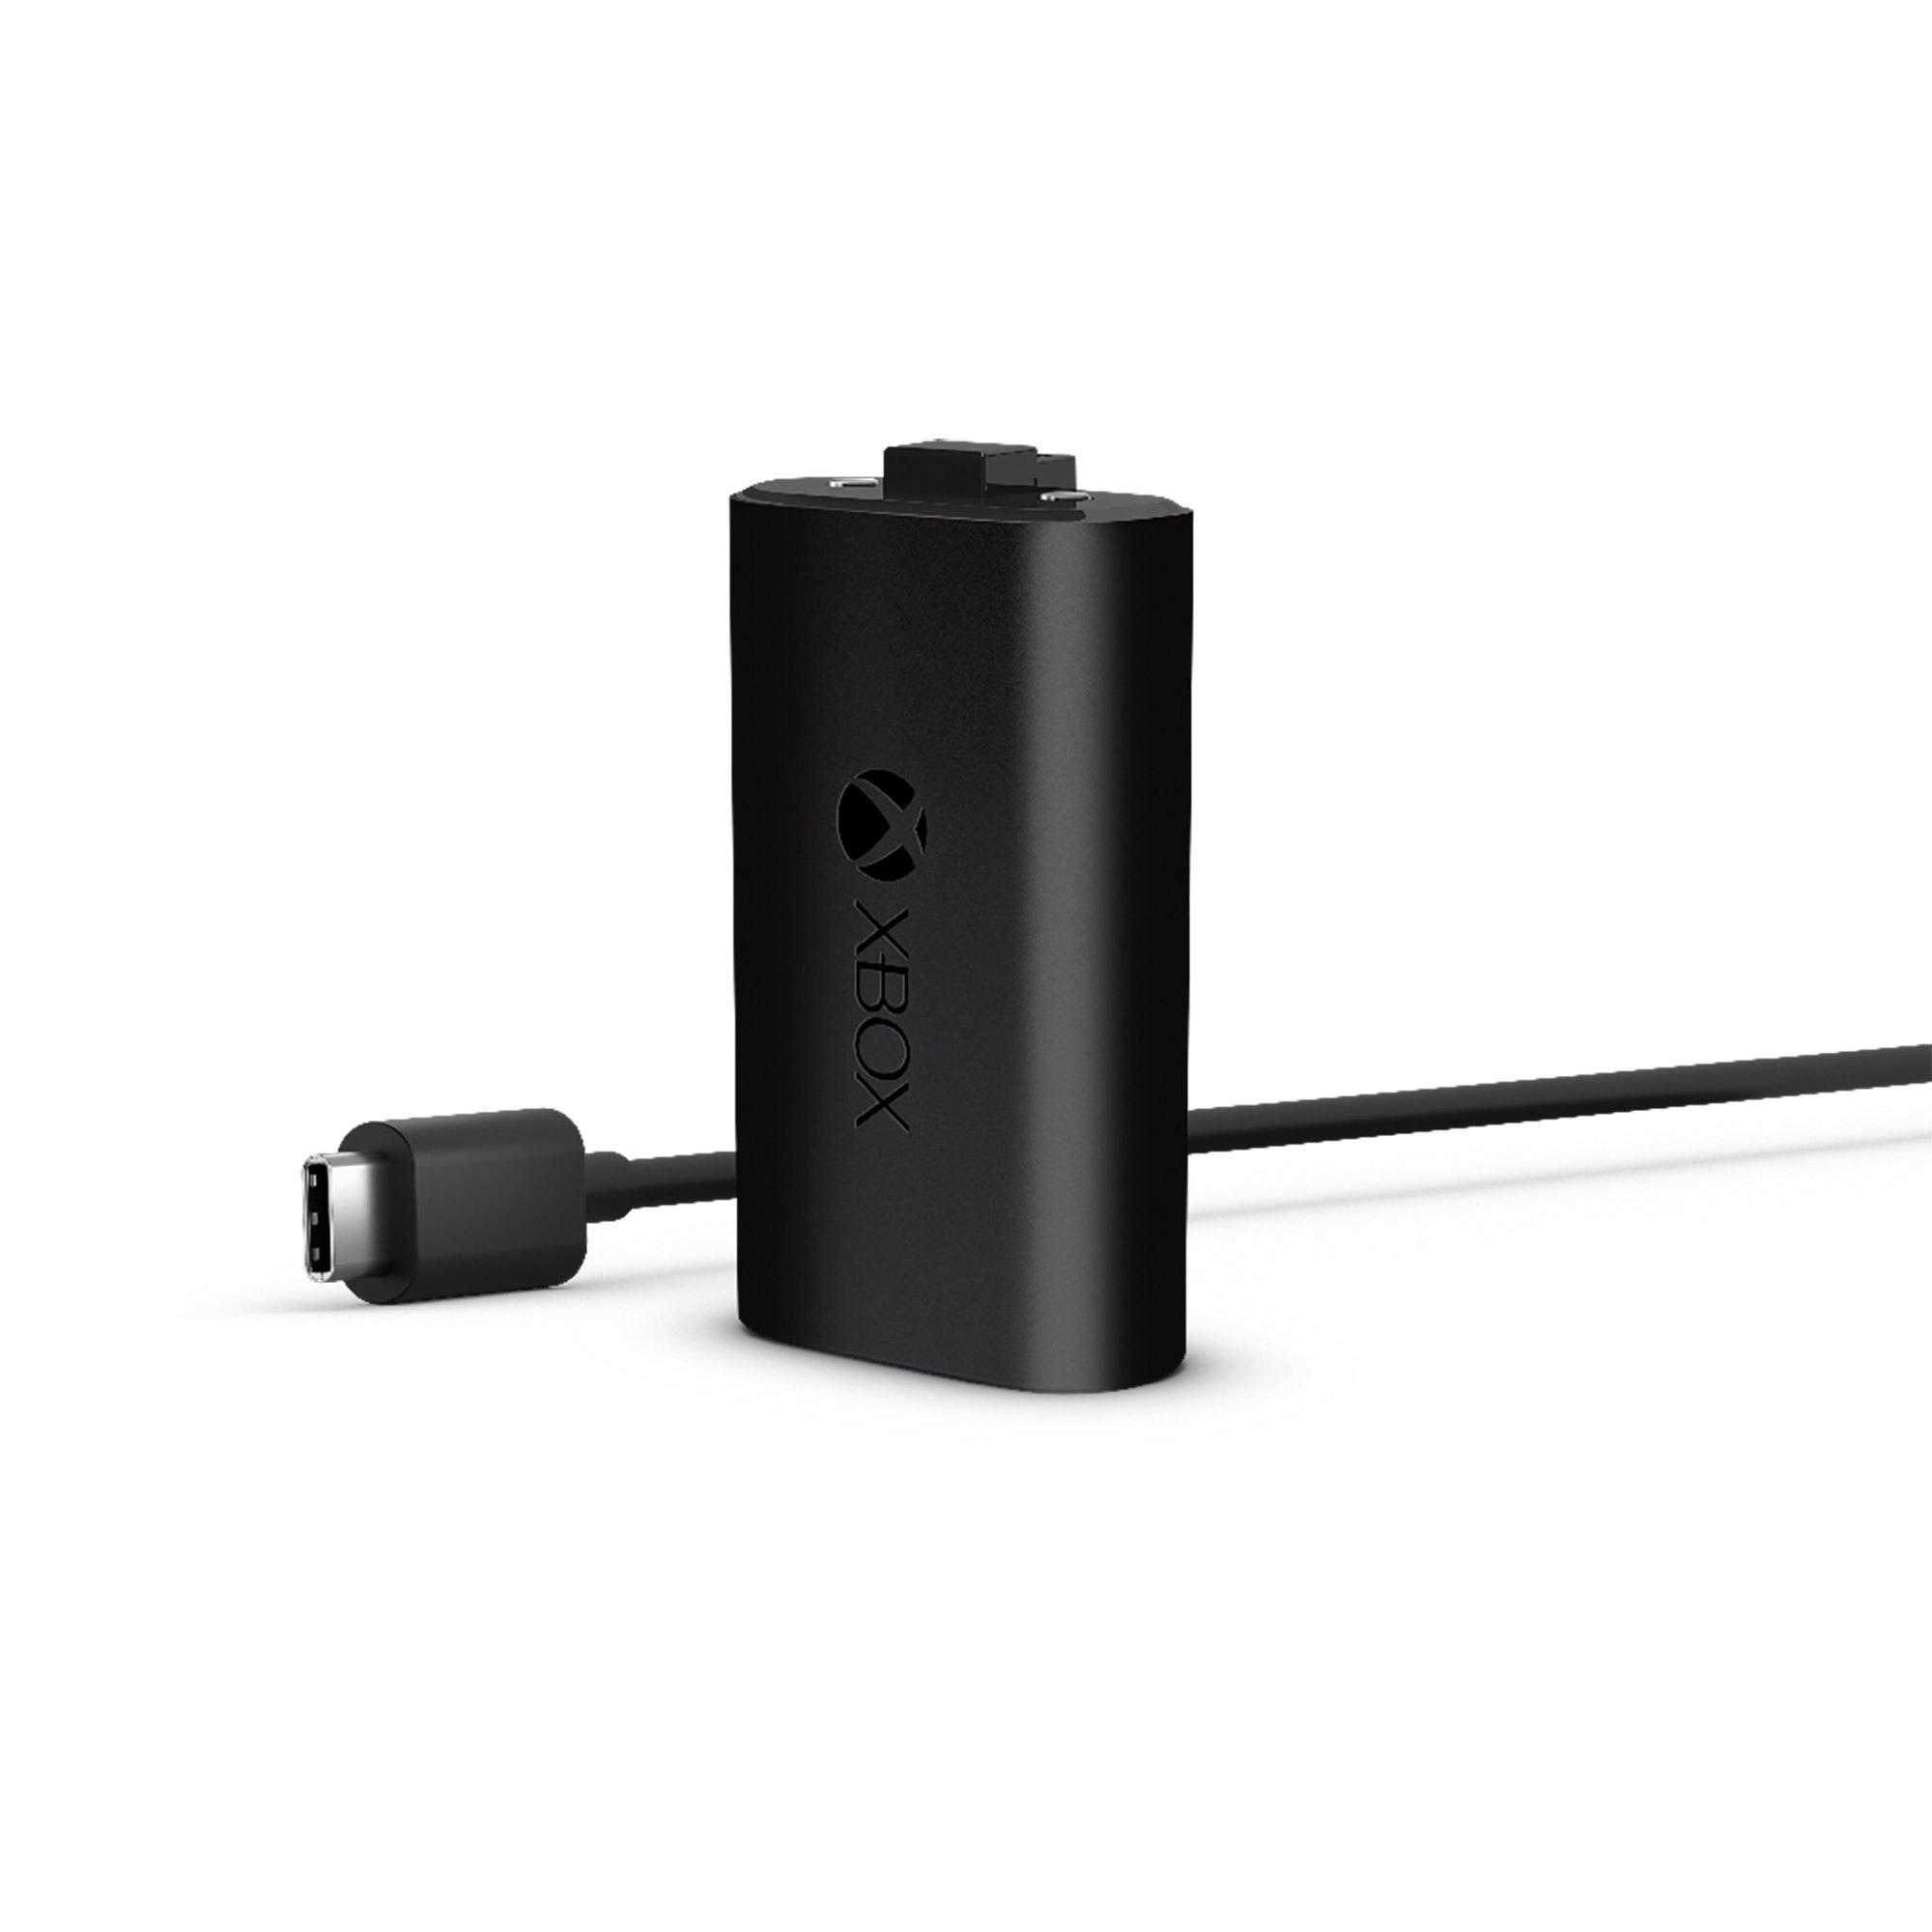 list item 2 of 6 Xbox Series X Play and Charge Kit